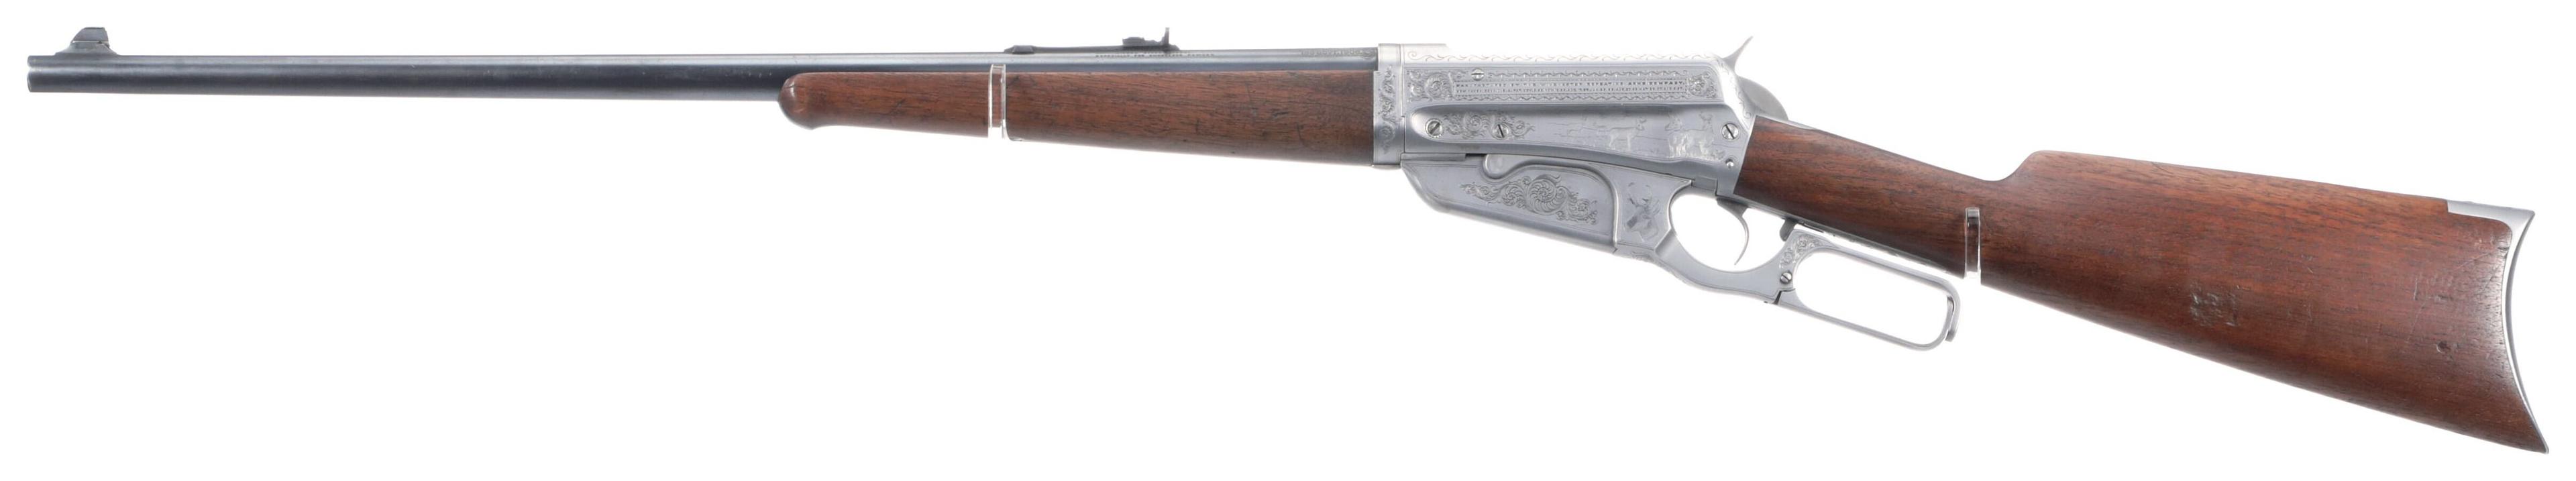 Engraved Winchester Model 1895 Takedown Rifle